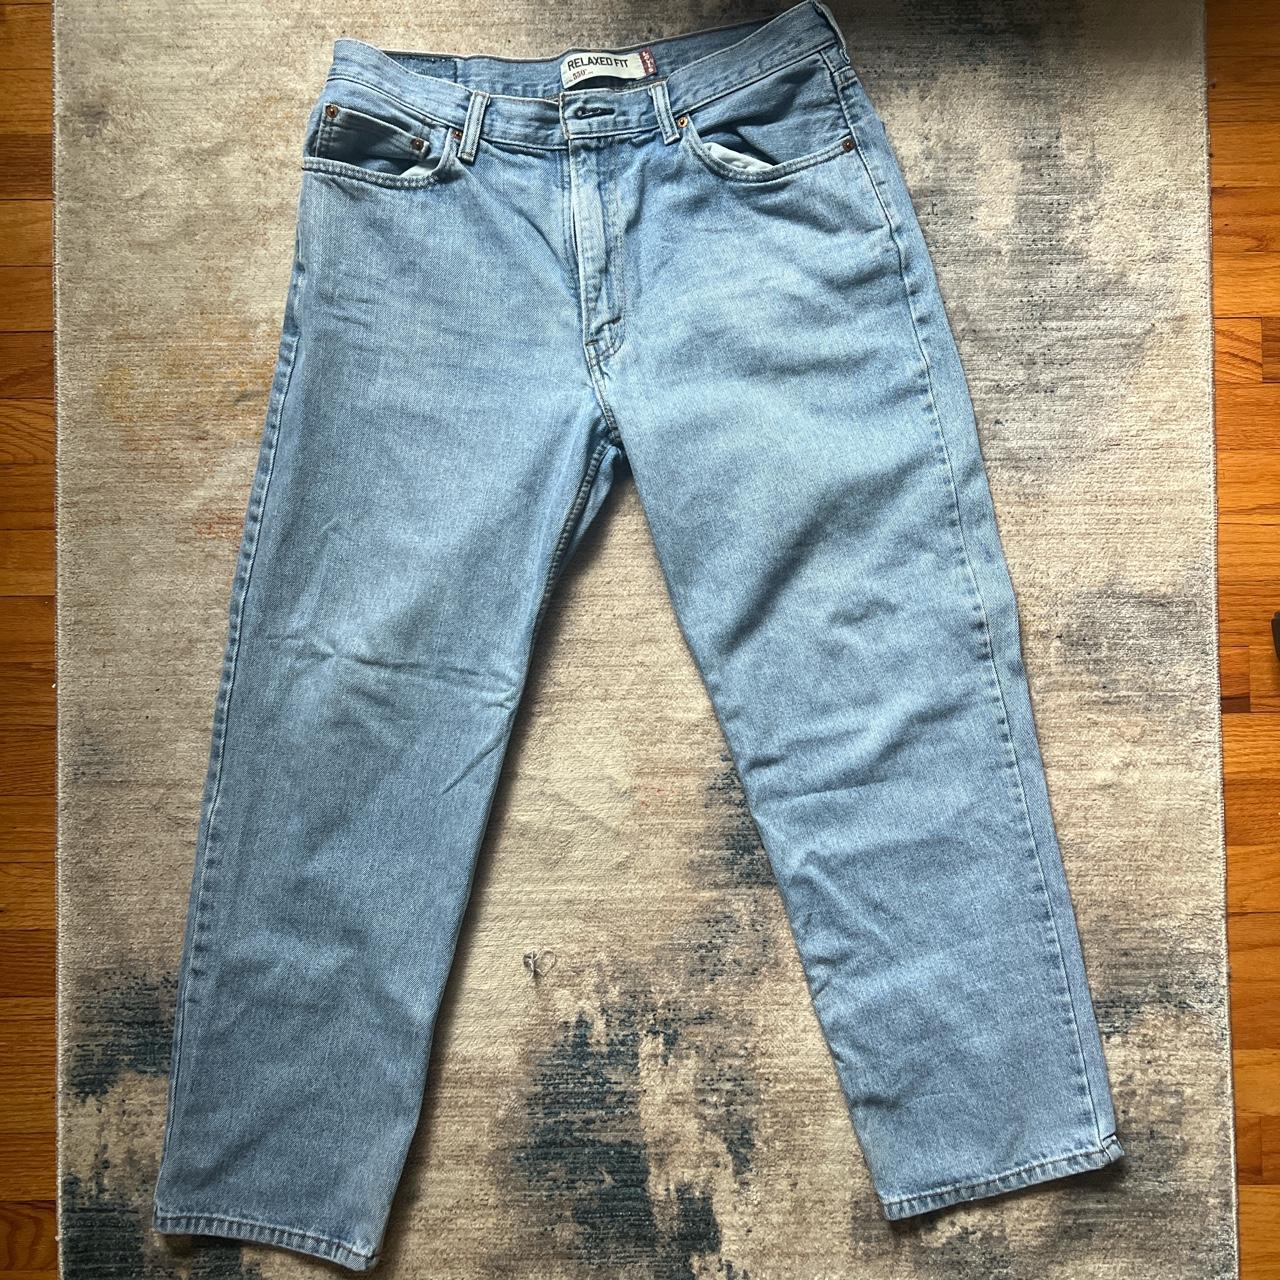 levi’s 550 relaxed fit 36x30 - Depop